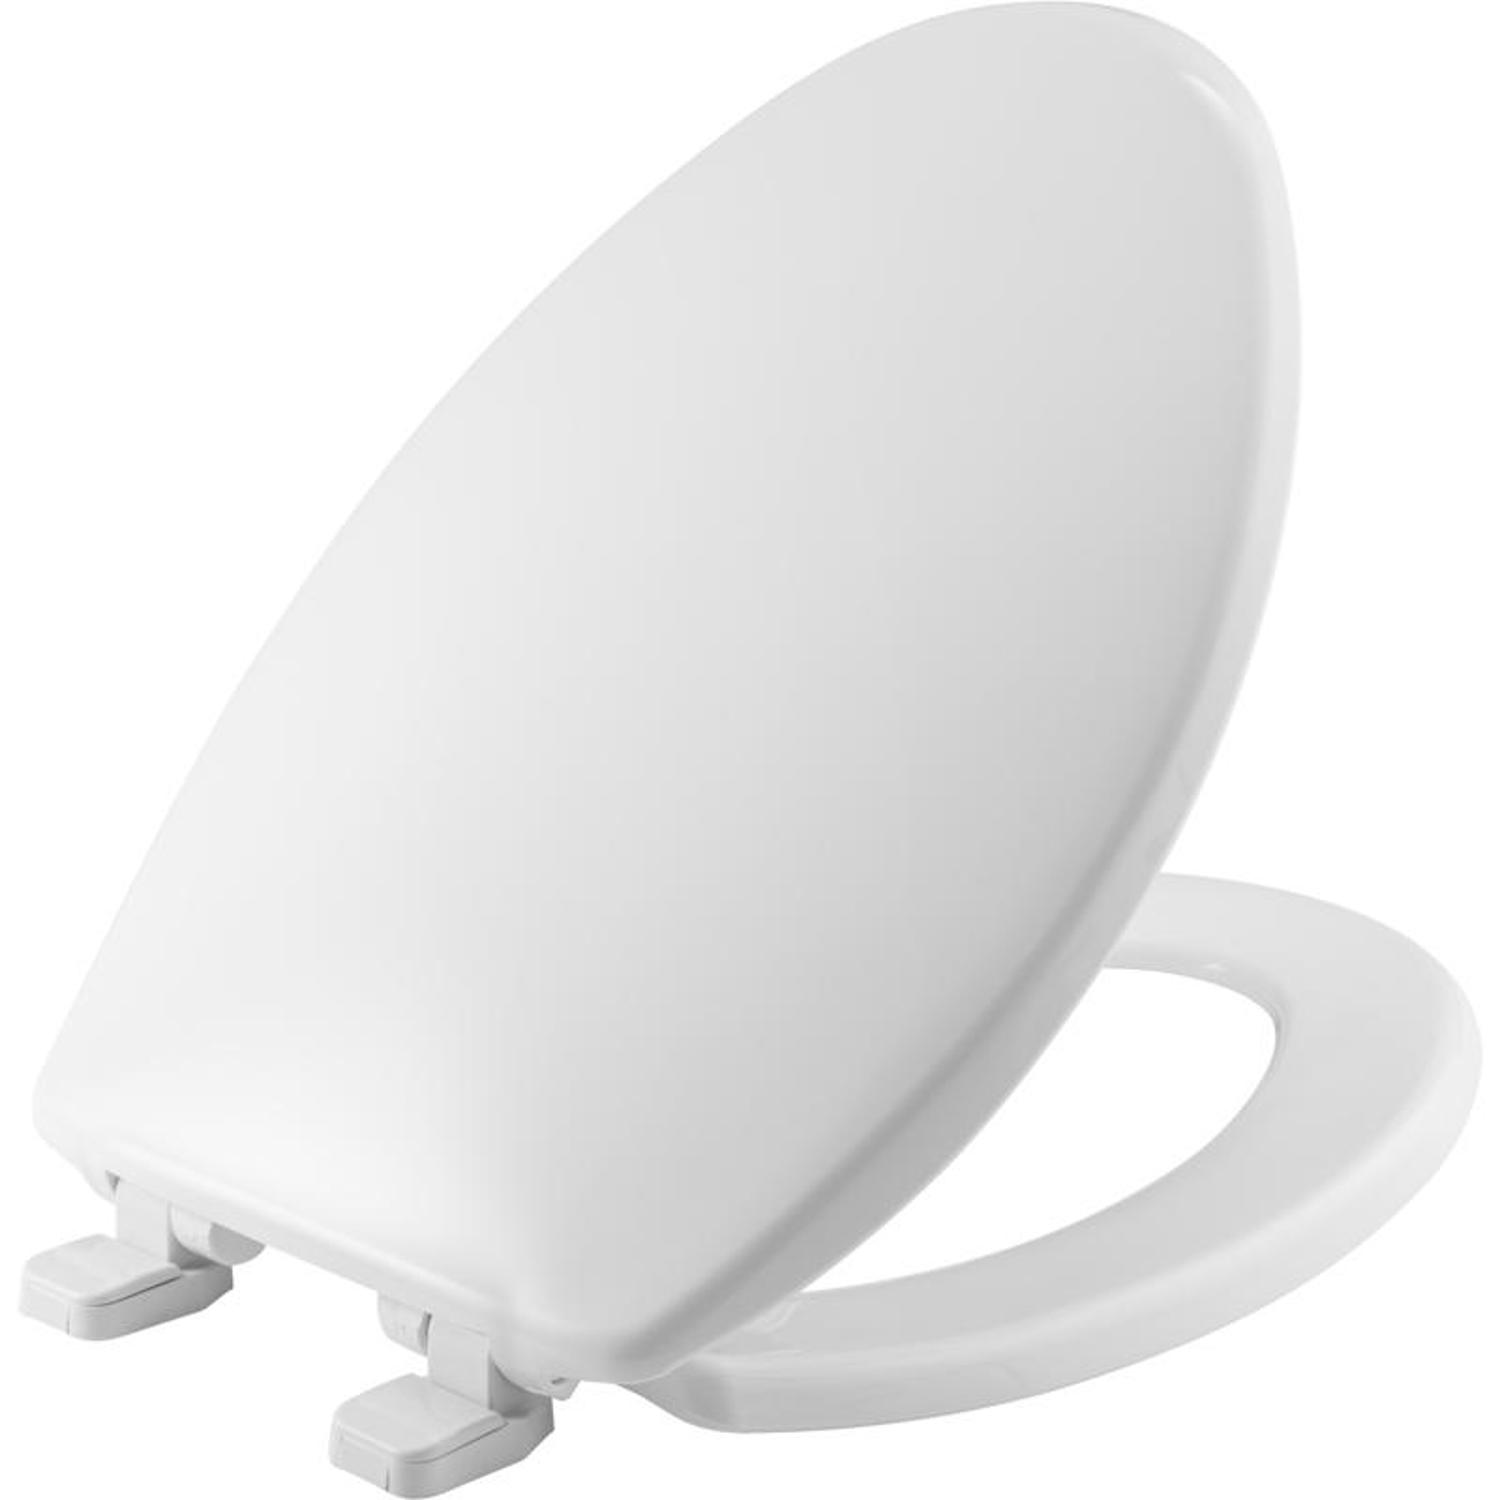 Photos - Other interior and decor Mayfair by Bemis Caswell Slow Close Elongated White Plastic Toilet Seat 18 